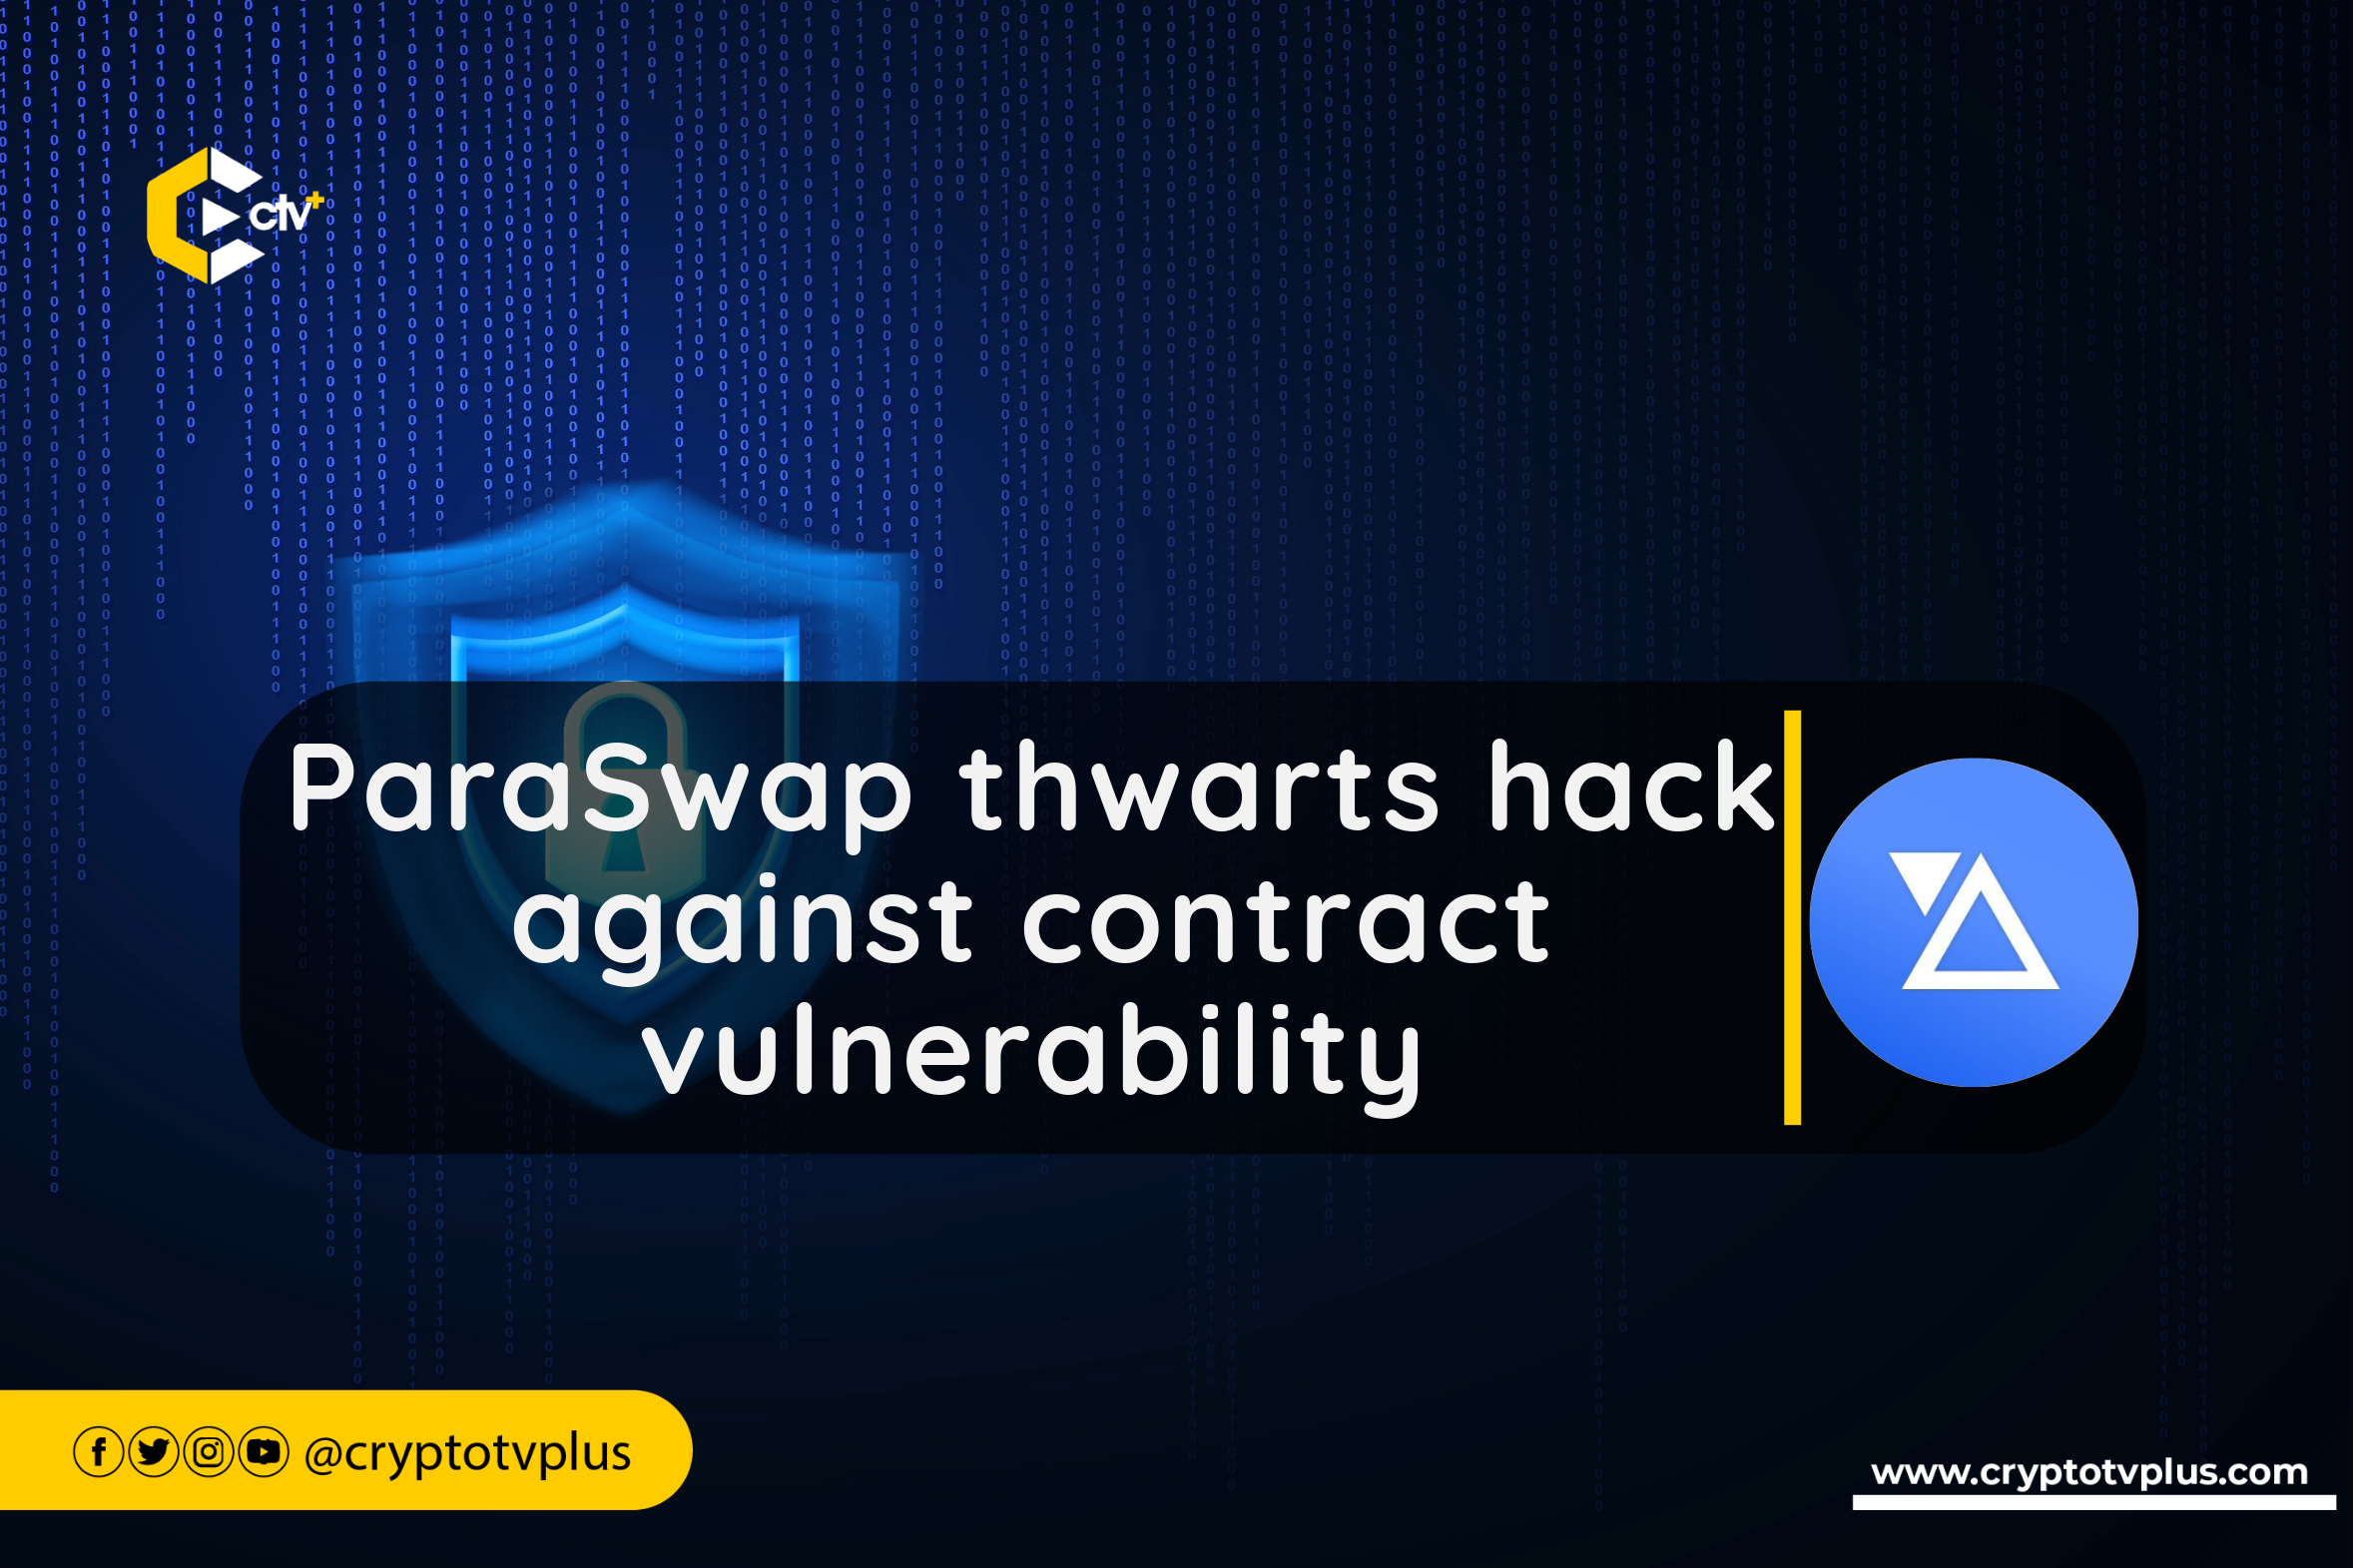 ParaSwap successfully thwarted a hacking attempt targeting vulnerabilities in the Augustus v6 contract, ensuring the platform's security and integrity.